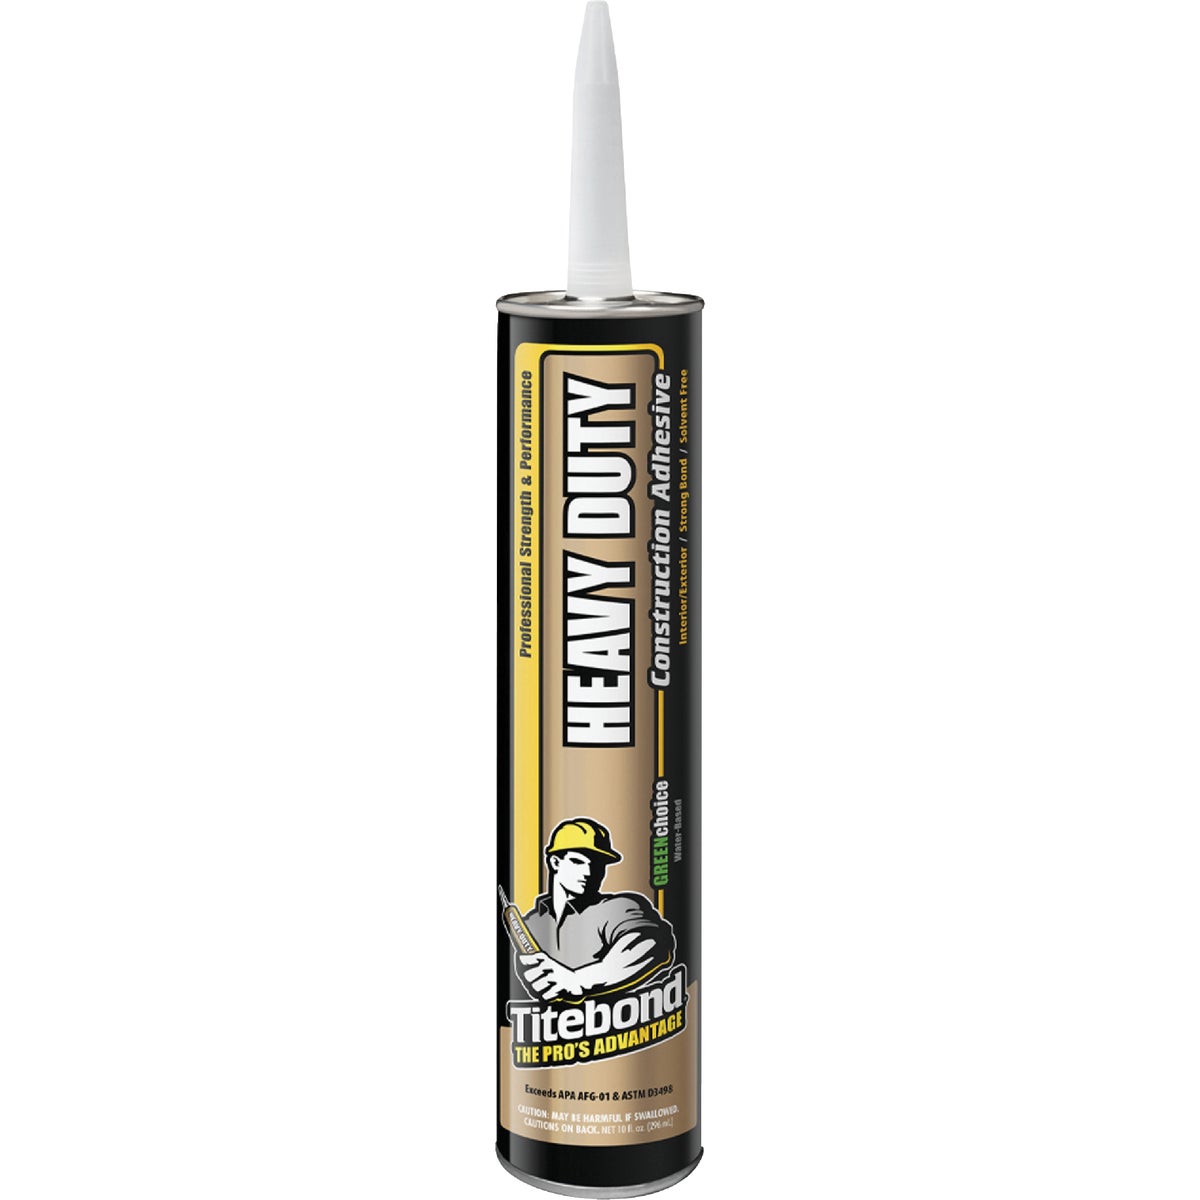 Item 287539, Professional strength, enviromentally safe adhesive for use on most common 